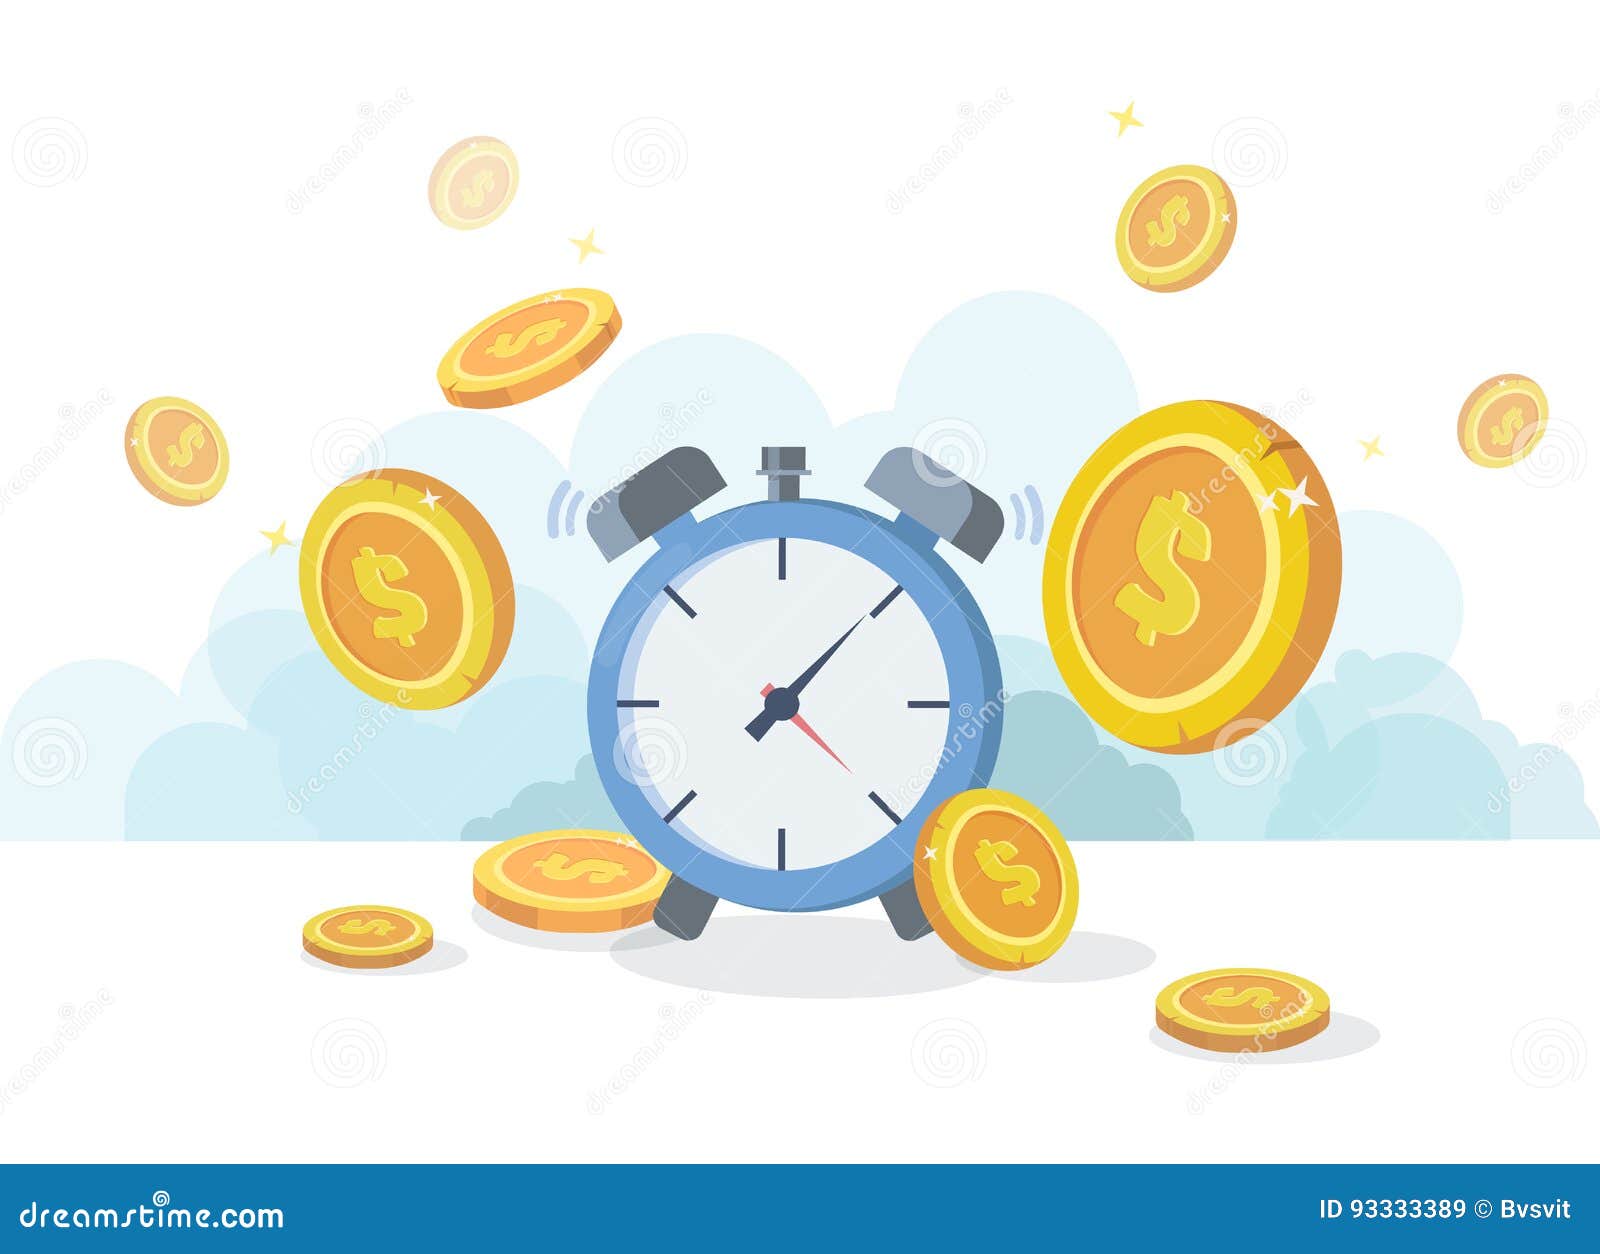 time is money concept. financial investments, revenue increase, budget management, savings account.flat 